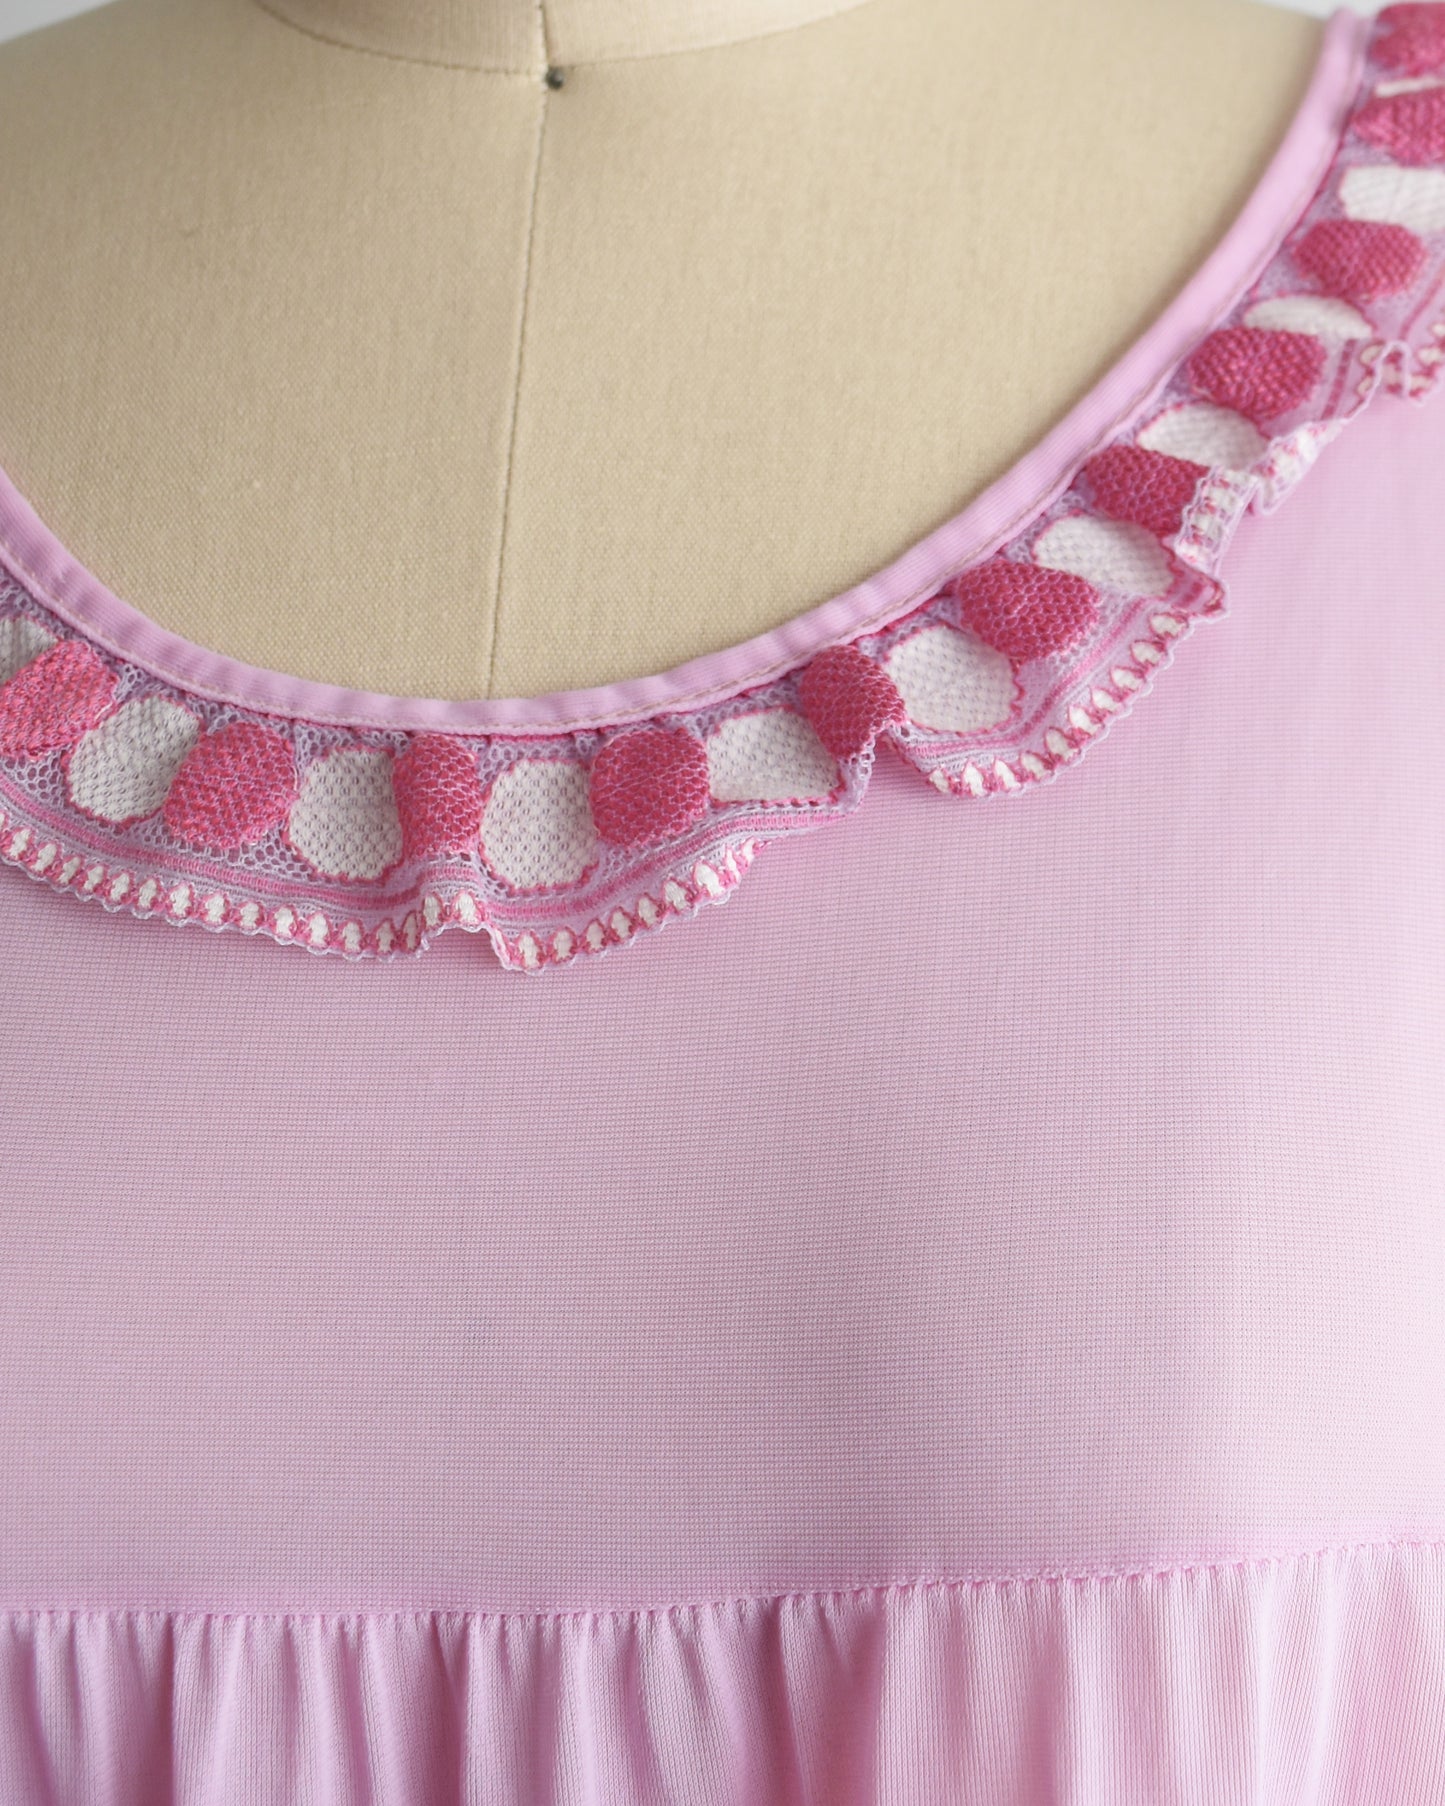 Close up of the dark raspberry and white embroidered ruffle trim along the neckline